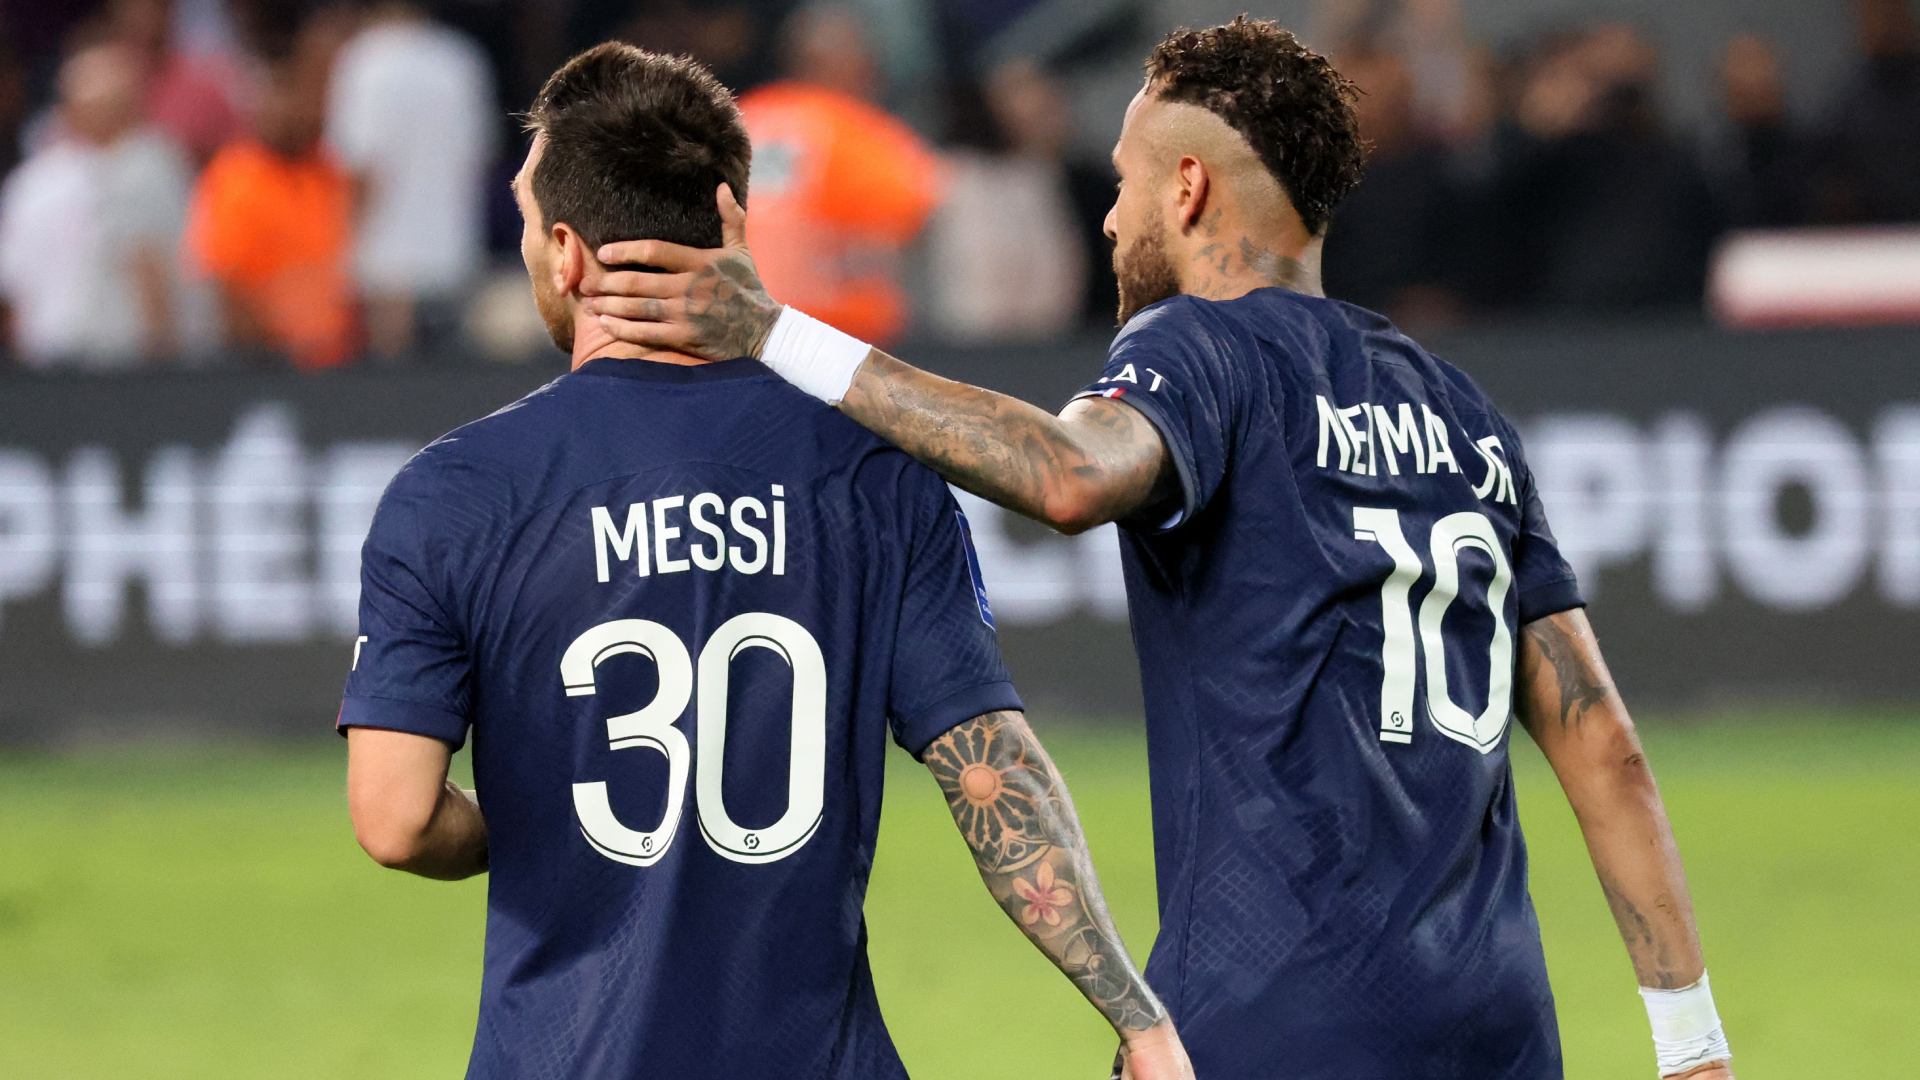 PSG vs Montpellier Live stream, TV channel, kick-off time and how to watch Goal US